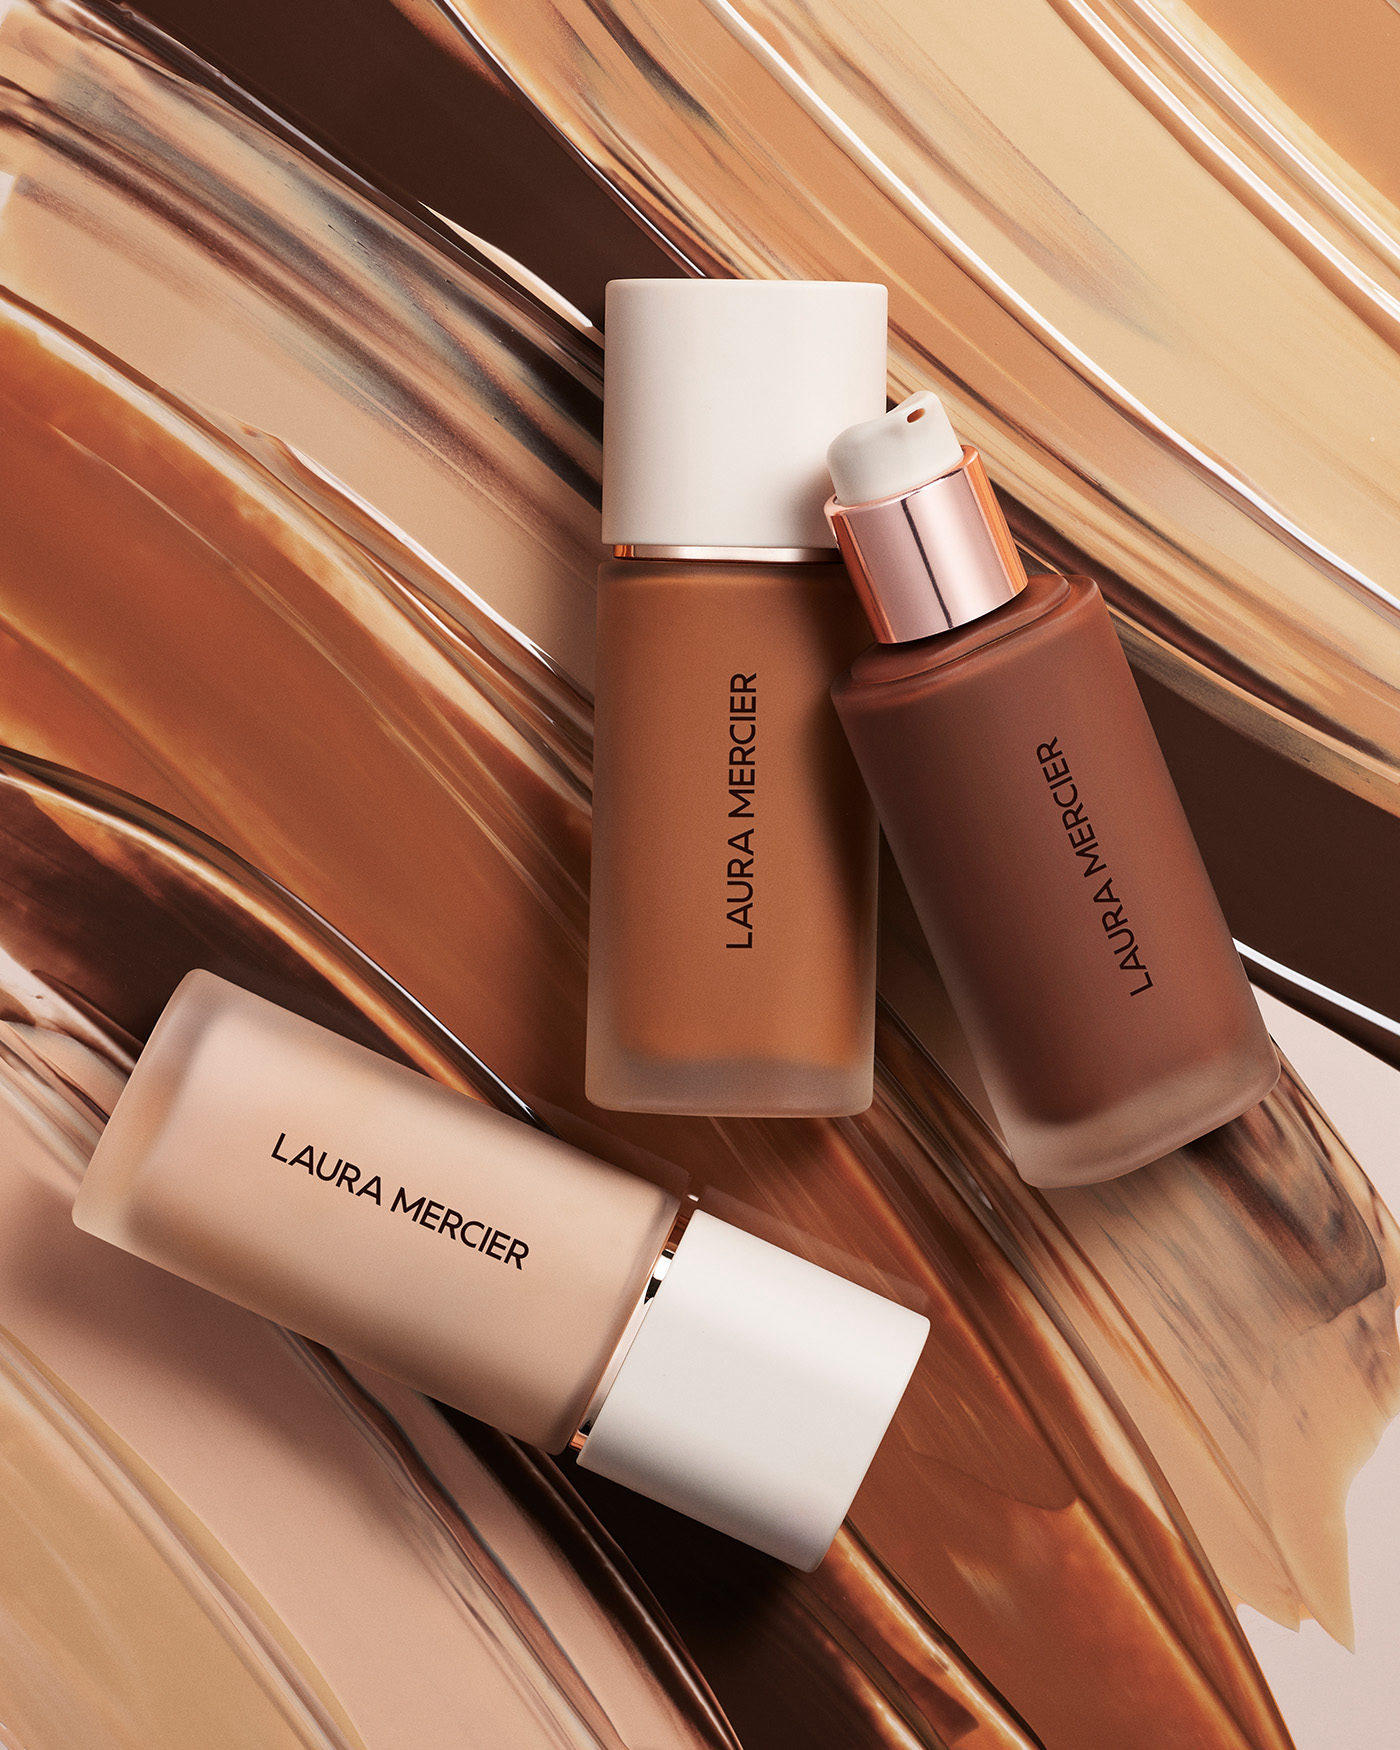 30 shades of weightless, flawless coverage – that means there’s a match for every beauté